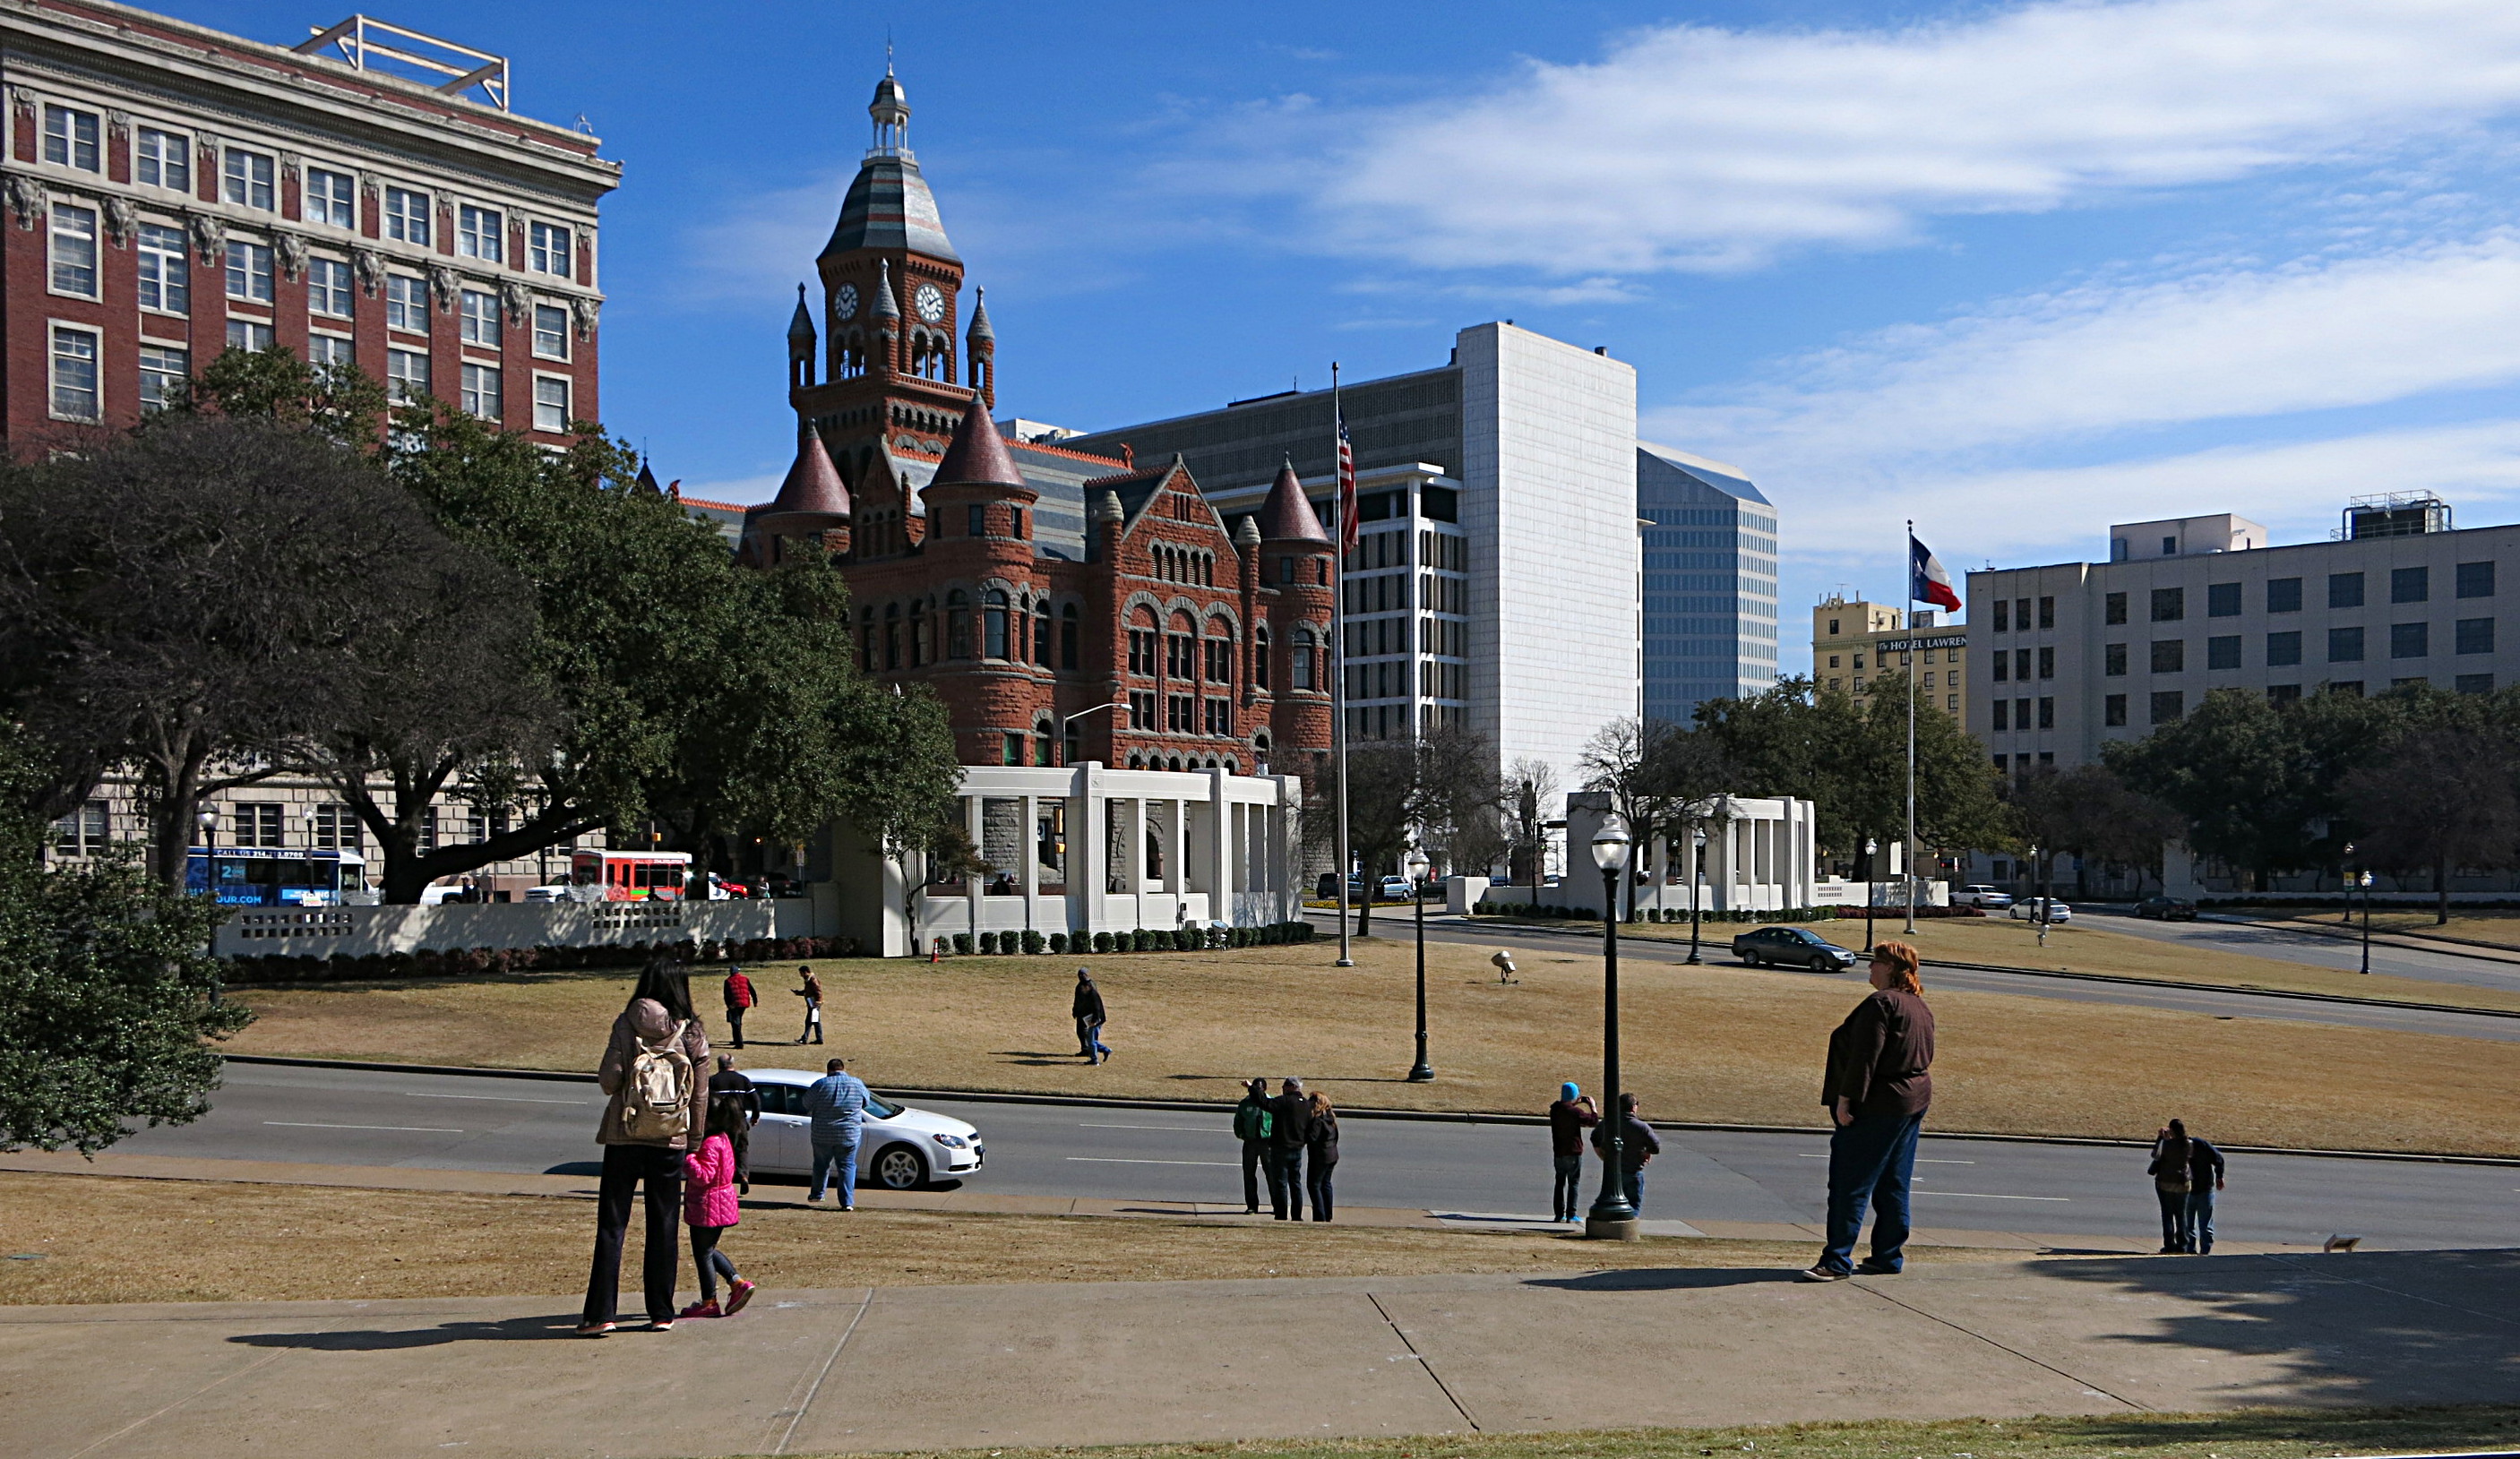 Dealey Plaza, seen here from the grassy knoll, is an iconic location in US history. Image by Clifton Wilkinson / Lonely Planet 